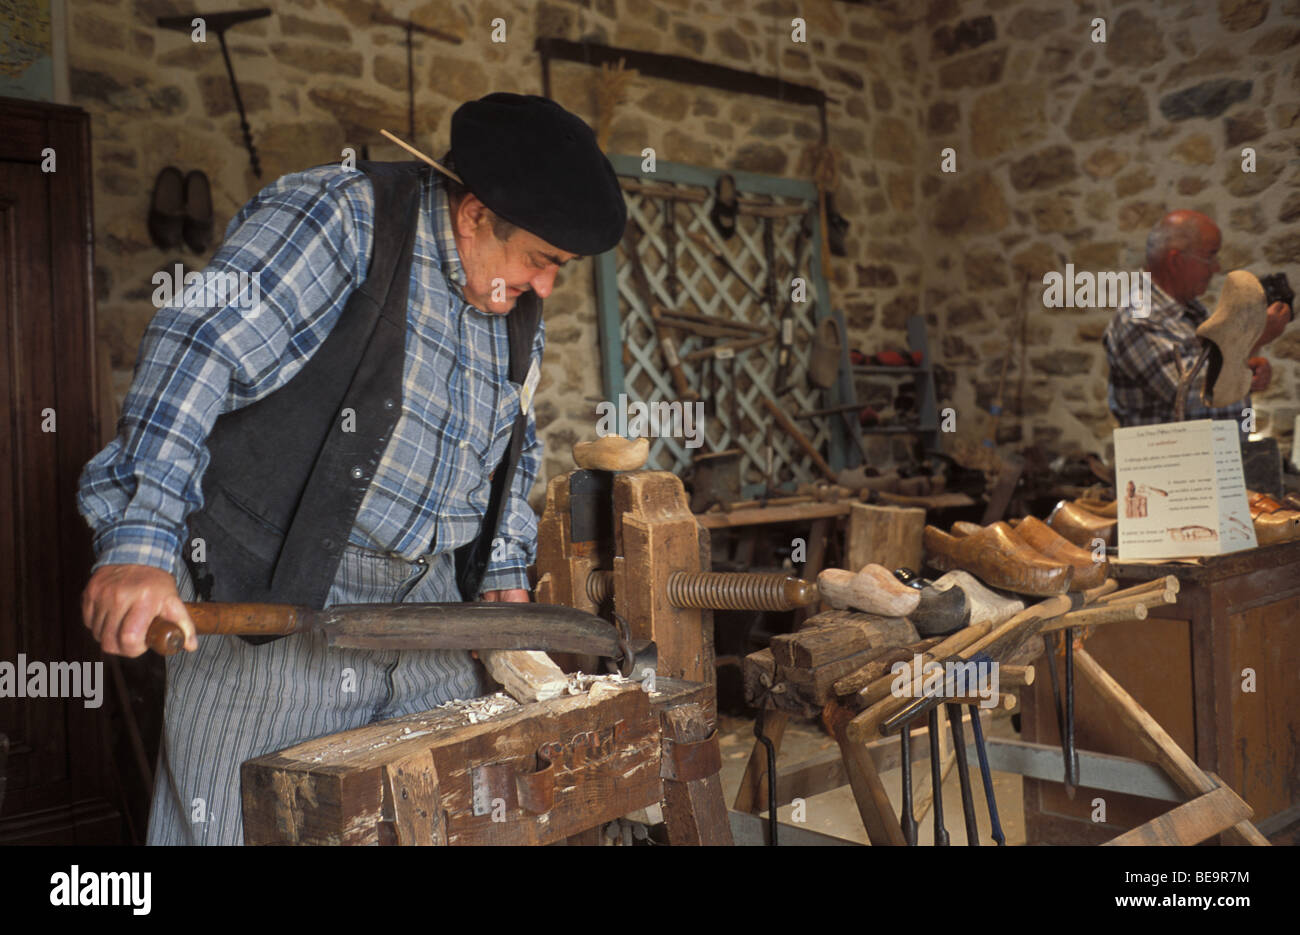 A clog or wooden shoe maker demonstrates his art at Argol museum in Finistere Brittany France Stock Photo